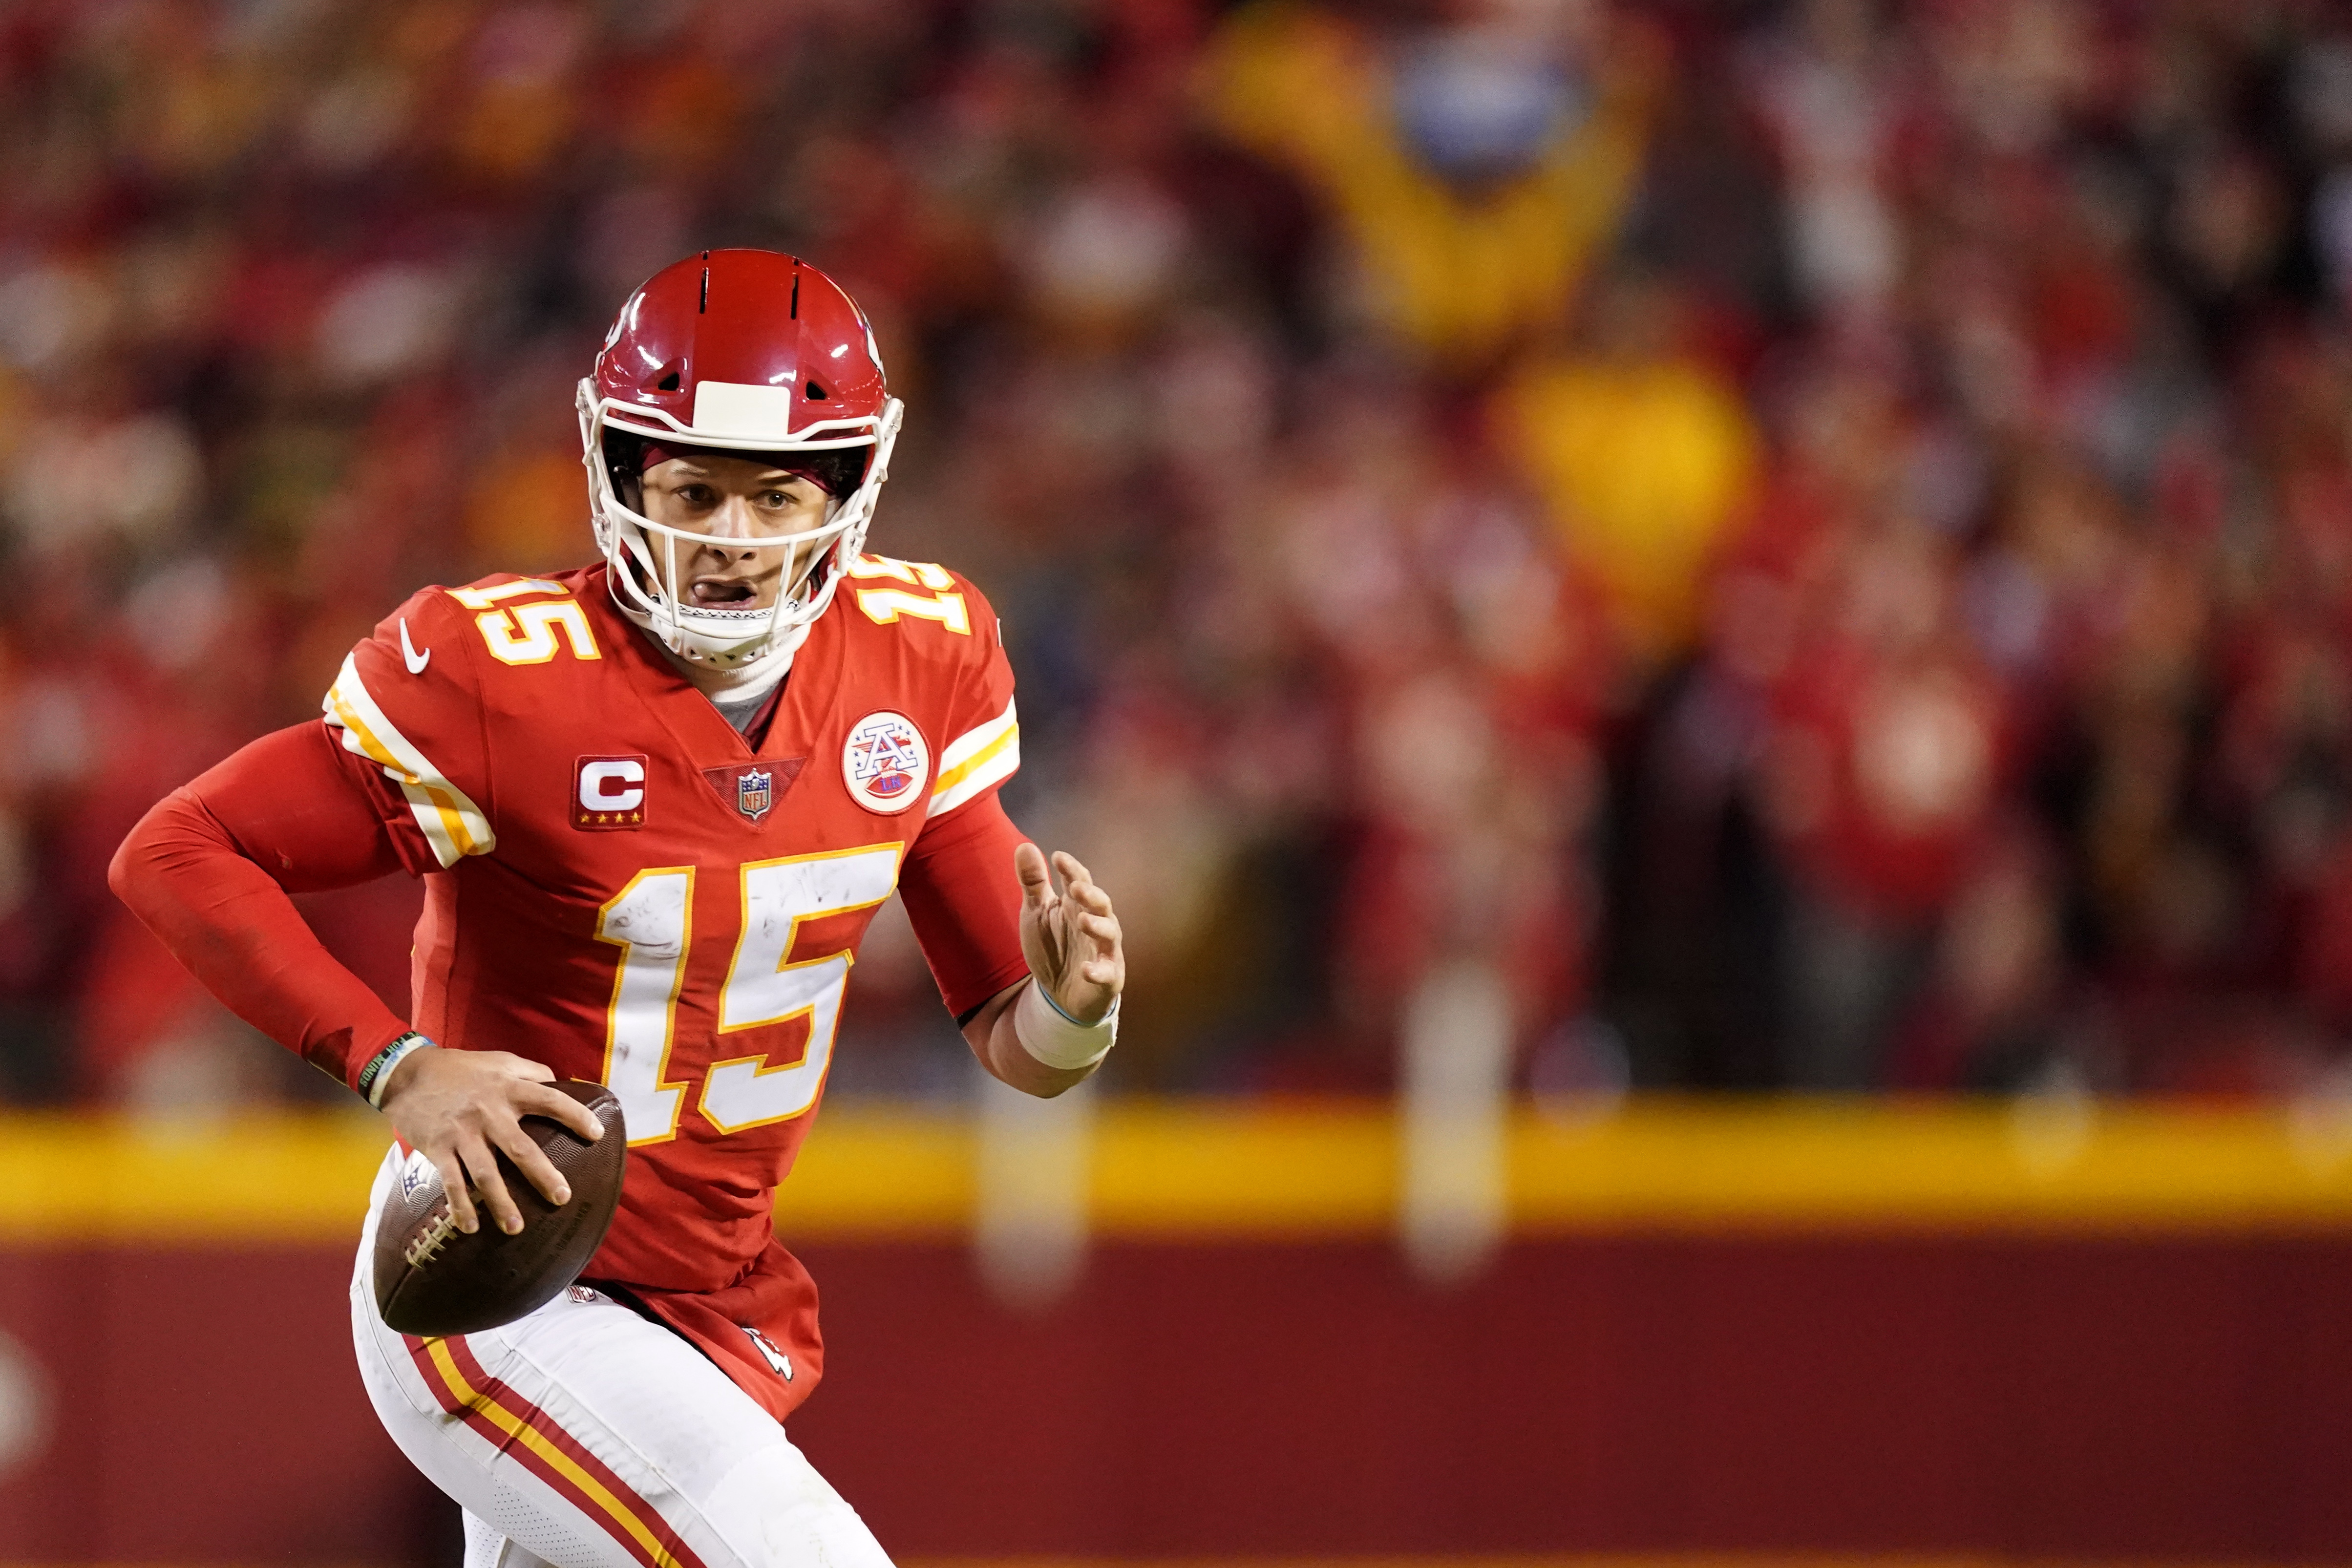 Bills vs. Chiefs Draws Highest TV Rating for NFL Divisional Playoff Game in 5 Years